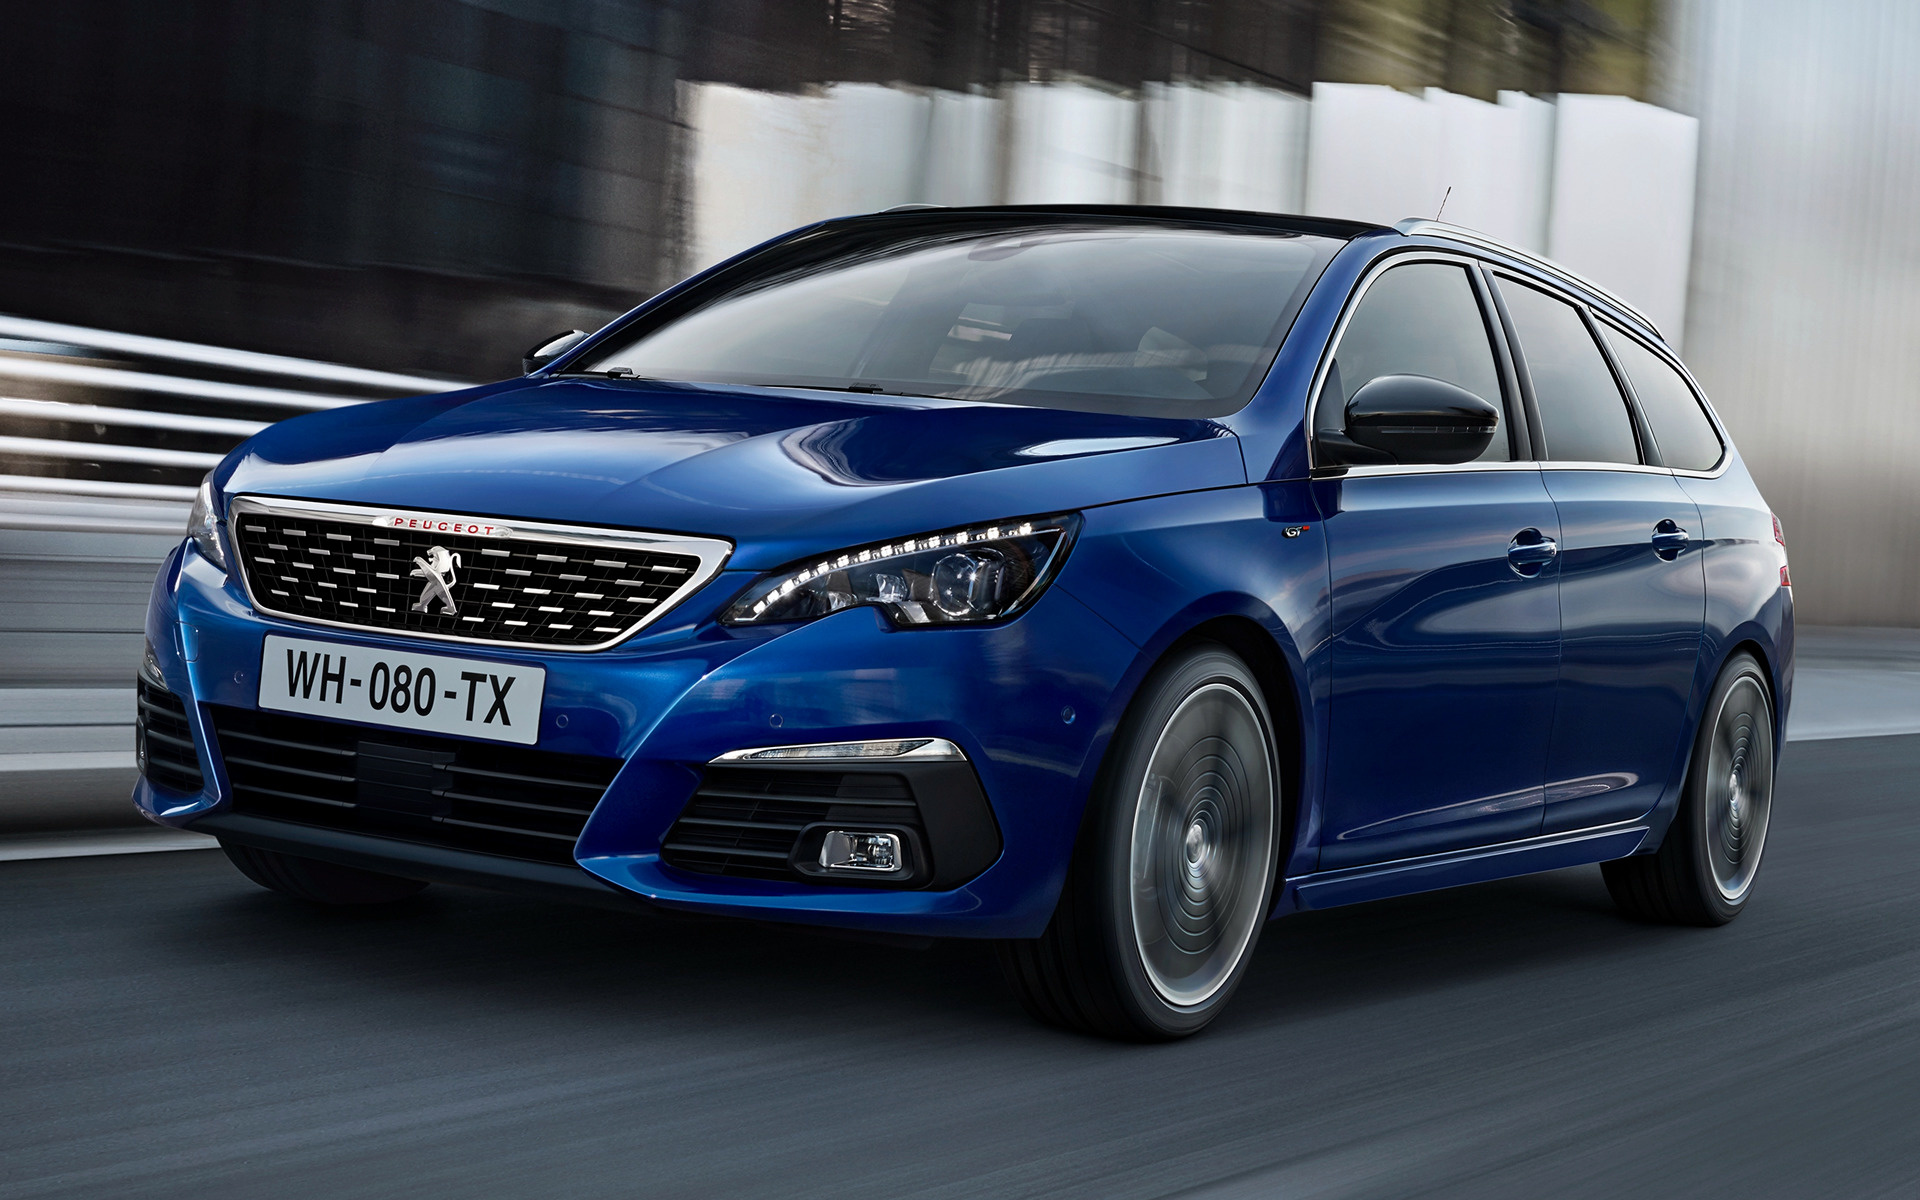 2017 Peugeot 308 SW GT Wallpapers and HD Images Car Pixel